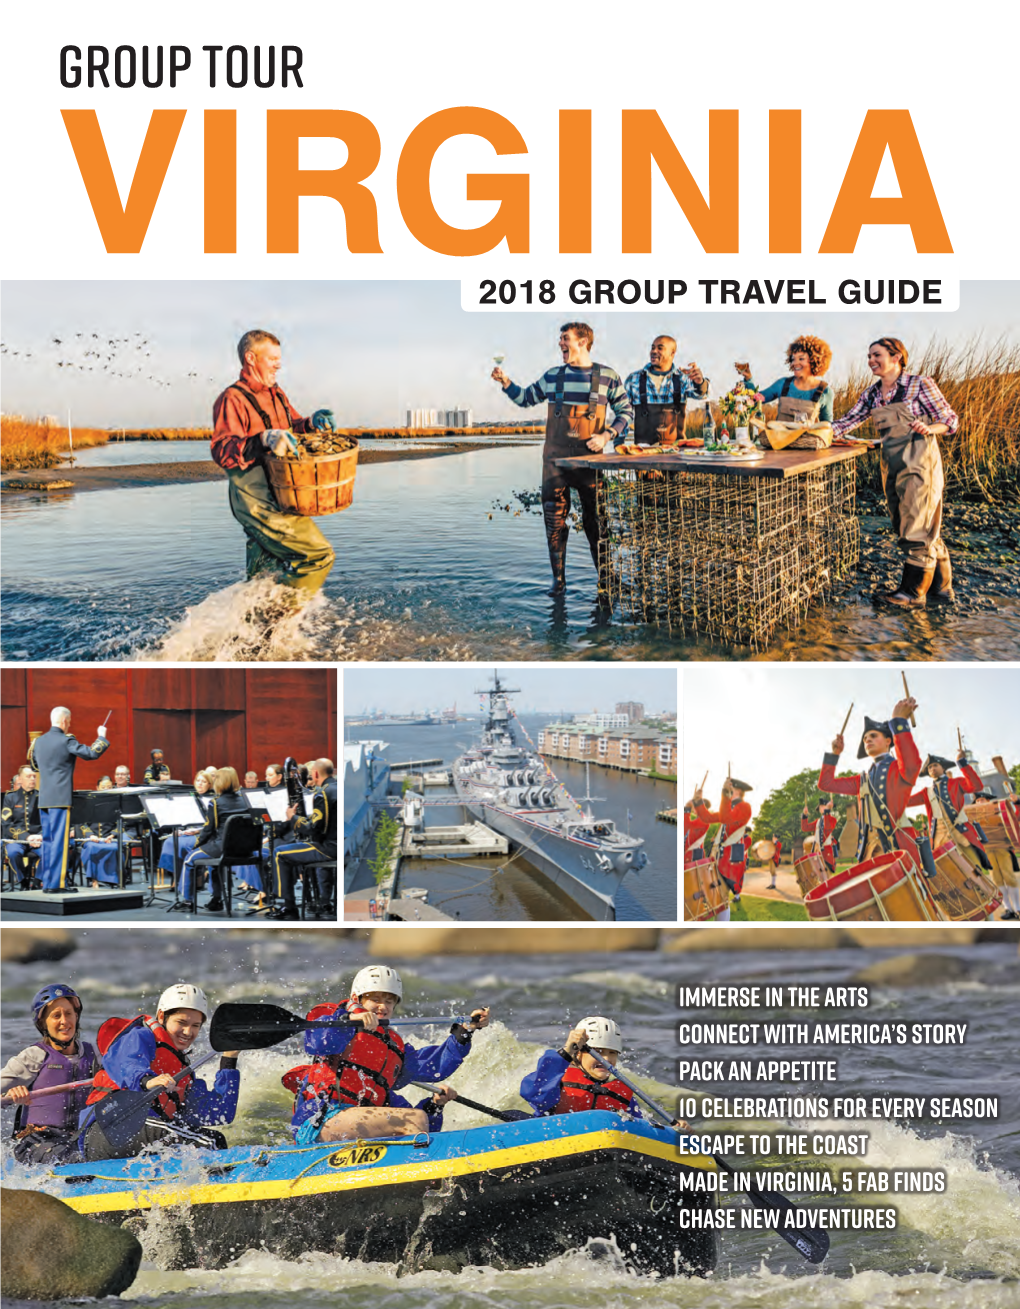 Group Tour Virginia 2018 Group Travel Guide